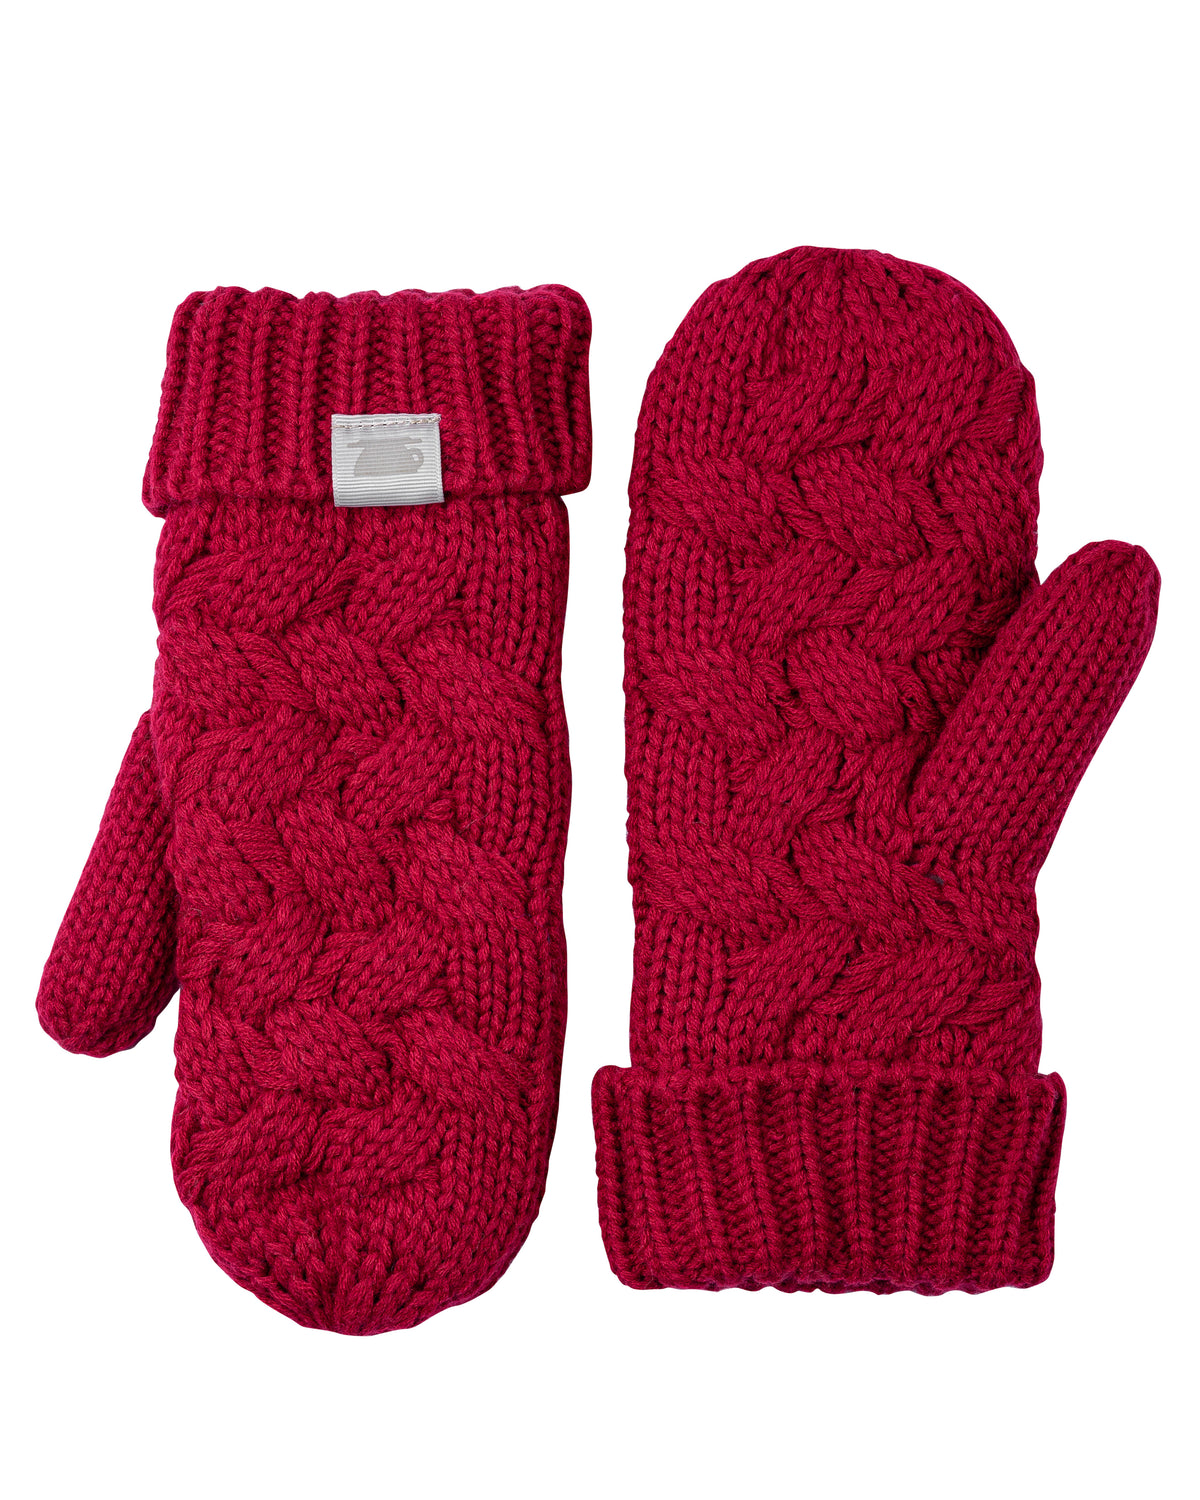 Embrace the Cold in Style: Stay Cozy with Coffee Shoppe's Textured Cable Collection in Deep Red!"